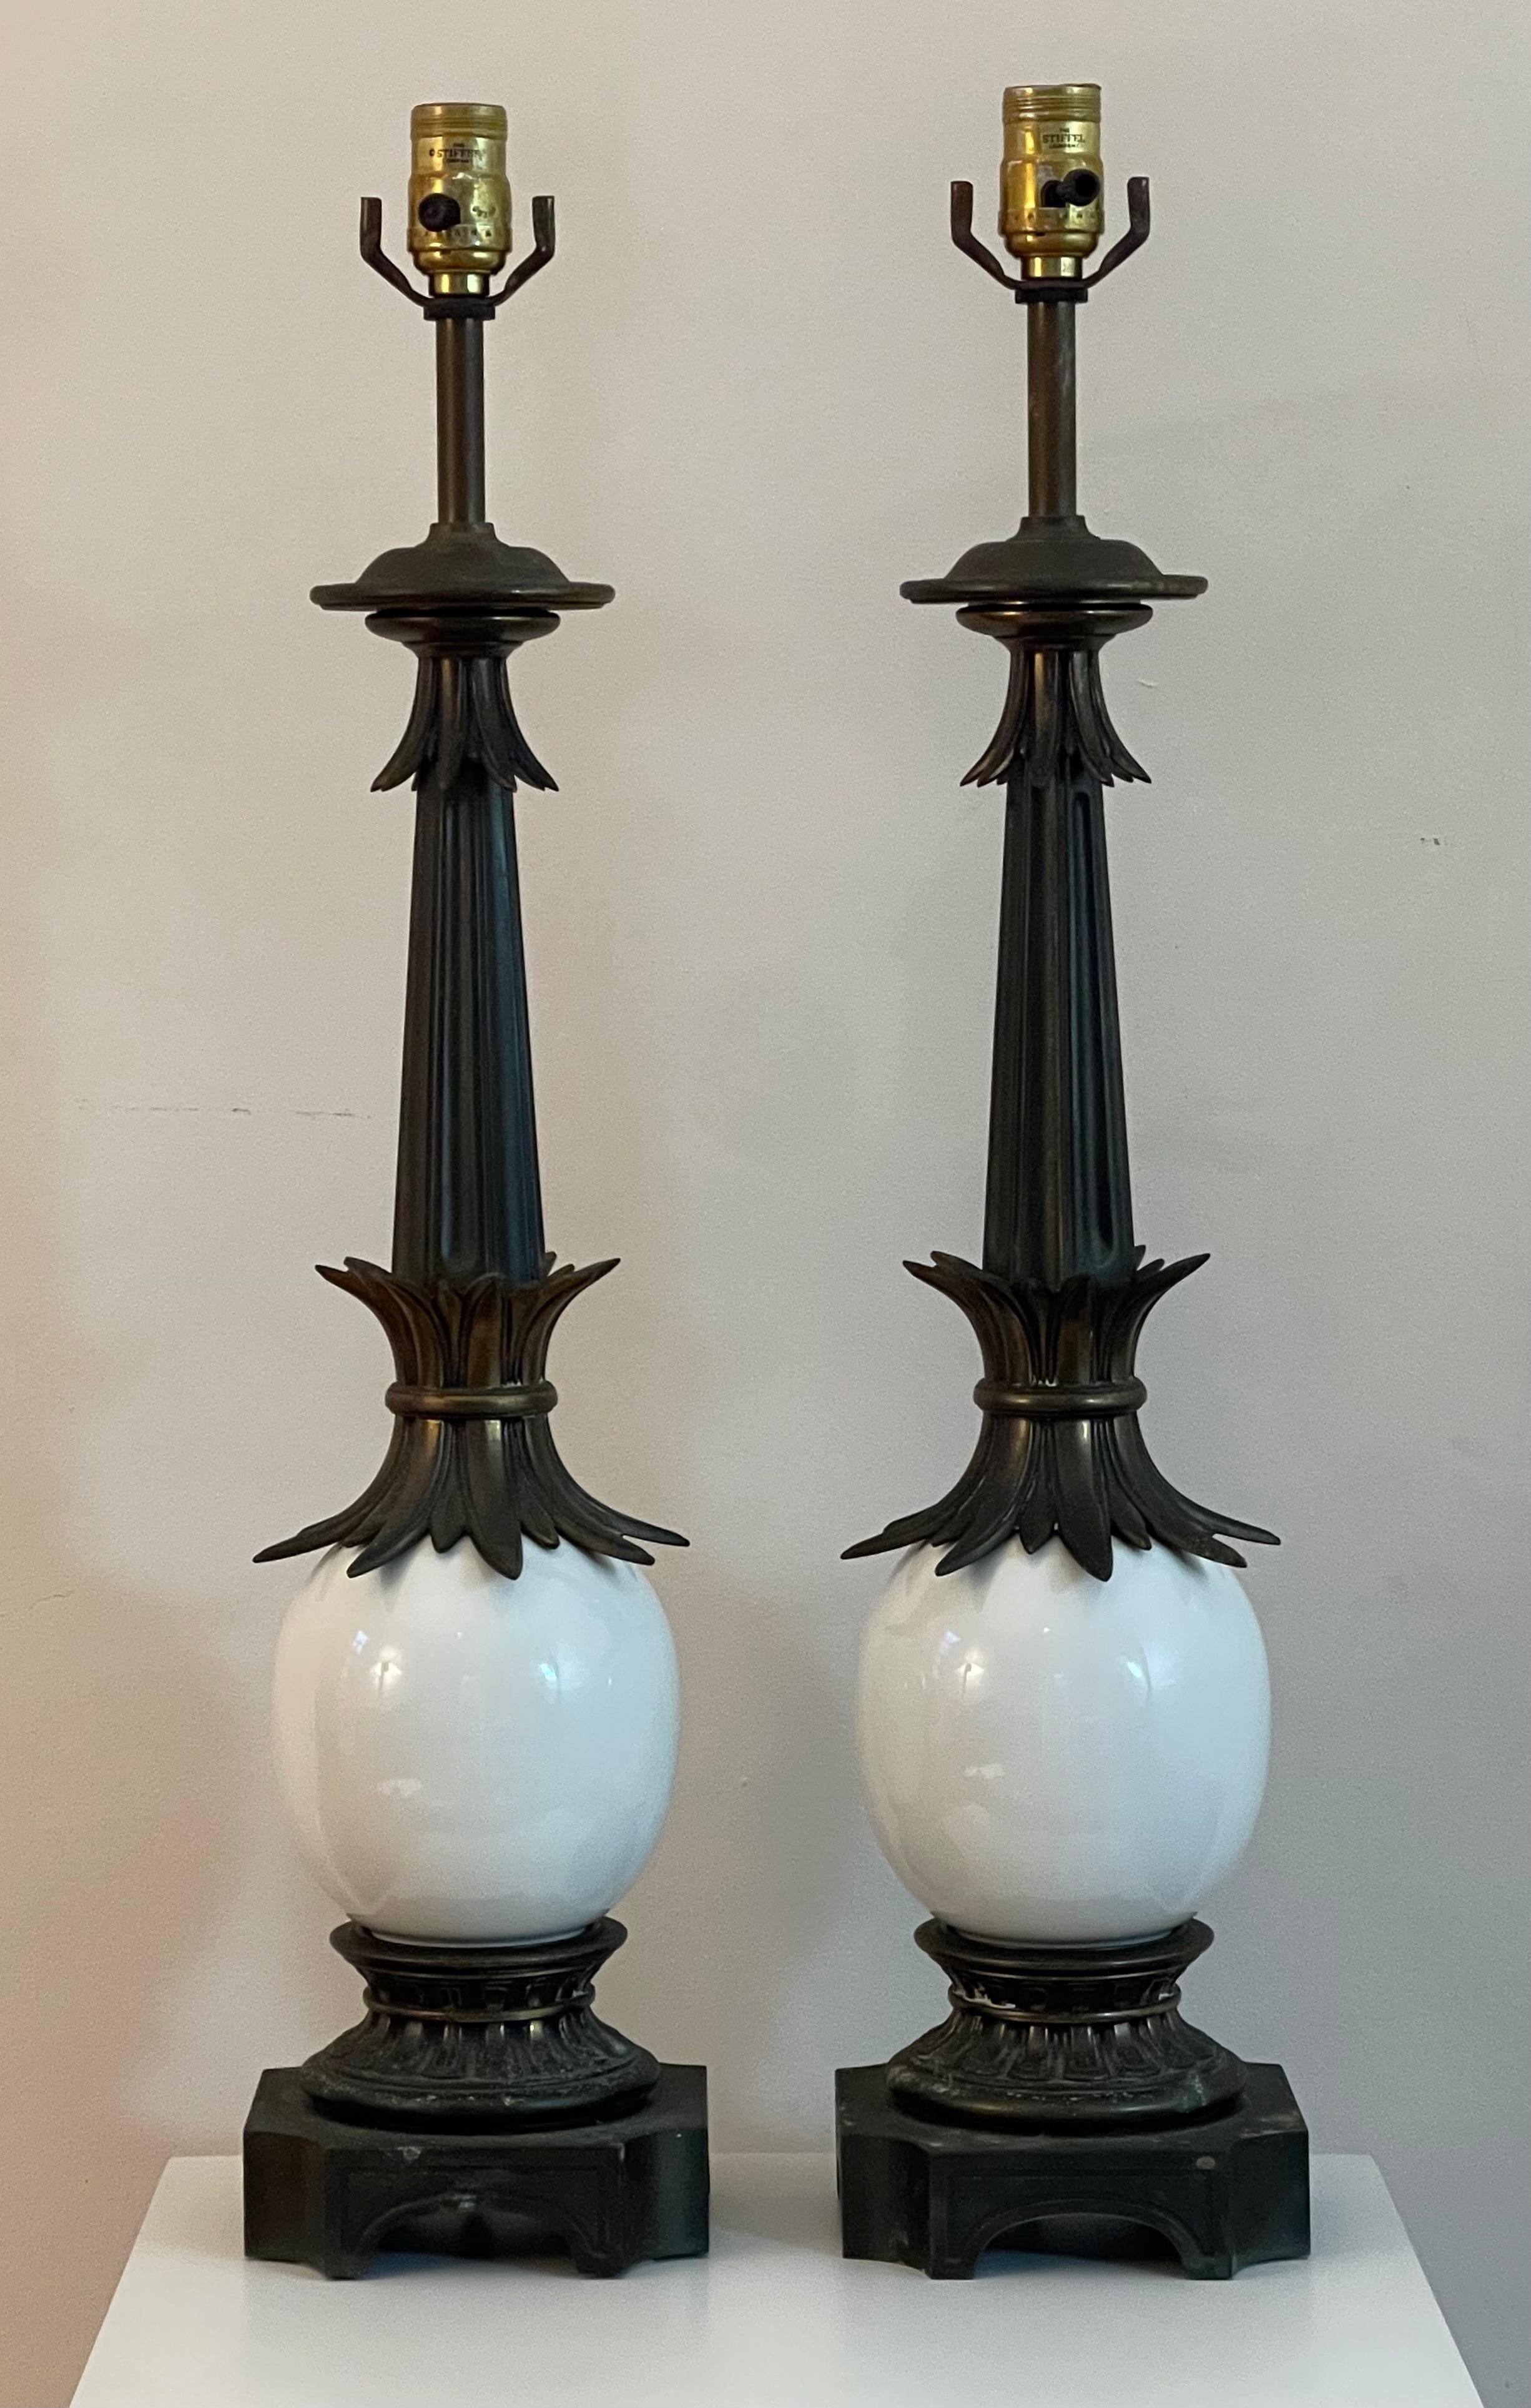 Chic pair of mid-century Stiffel lamps with iconic ostrich egg body. Handsome, dark bronze patina to brass ornamental elements and base.

